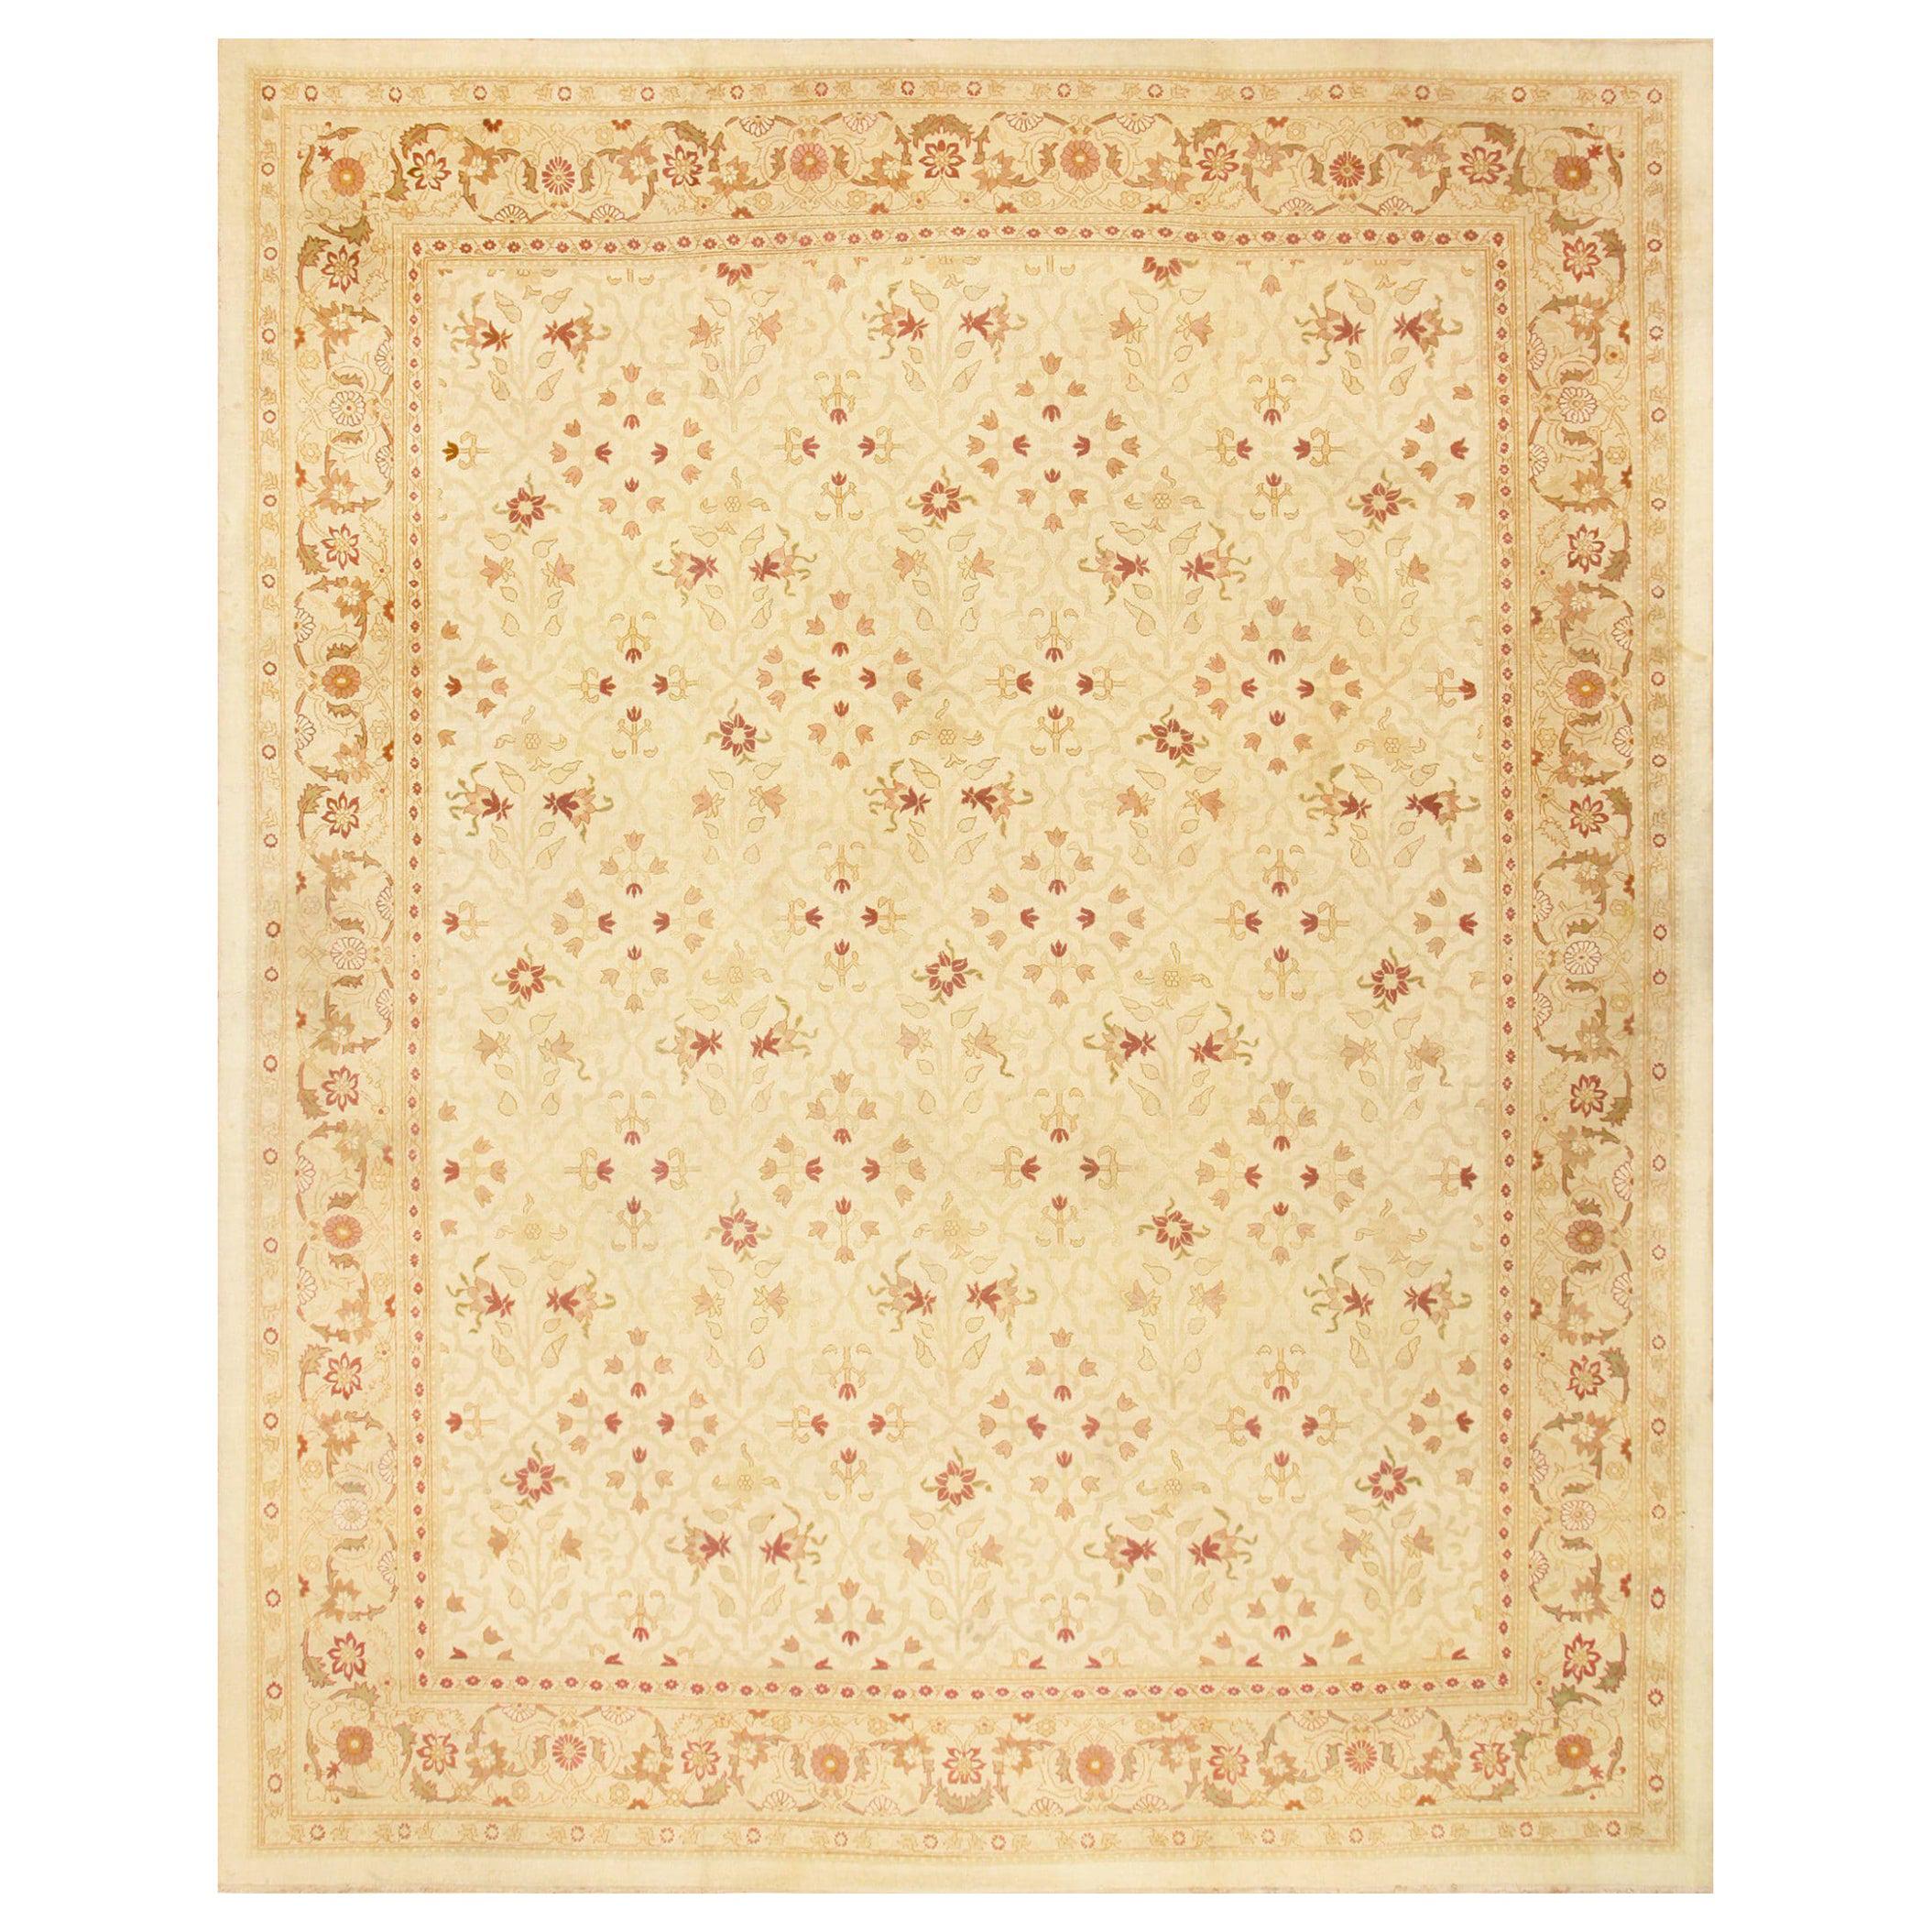 Tapis indien Amritsar. Taille : 13 ft 7 in x 17 ft 